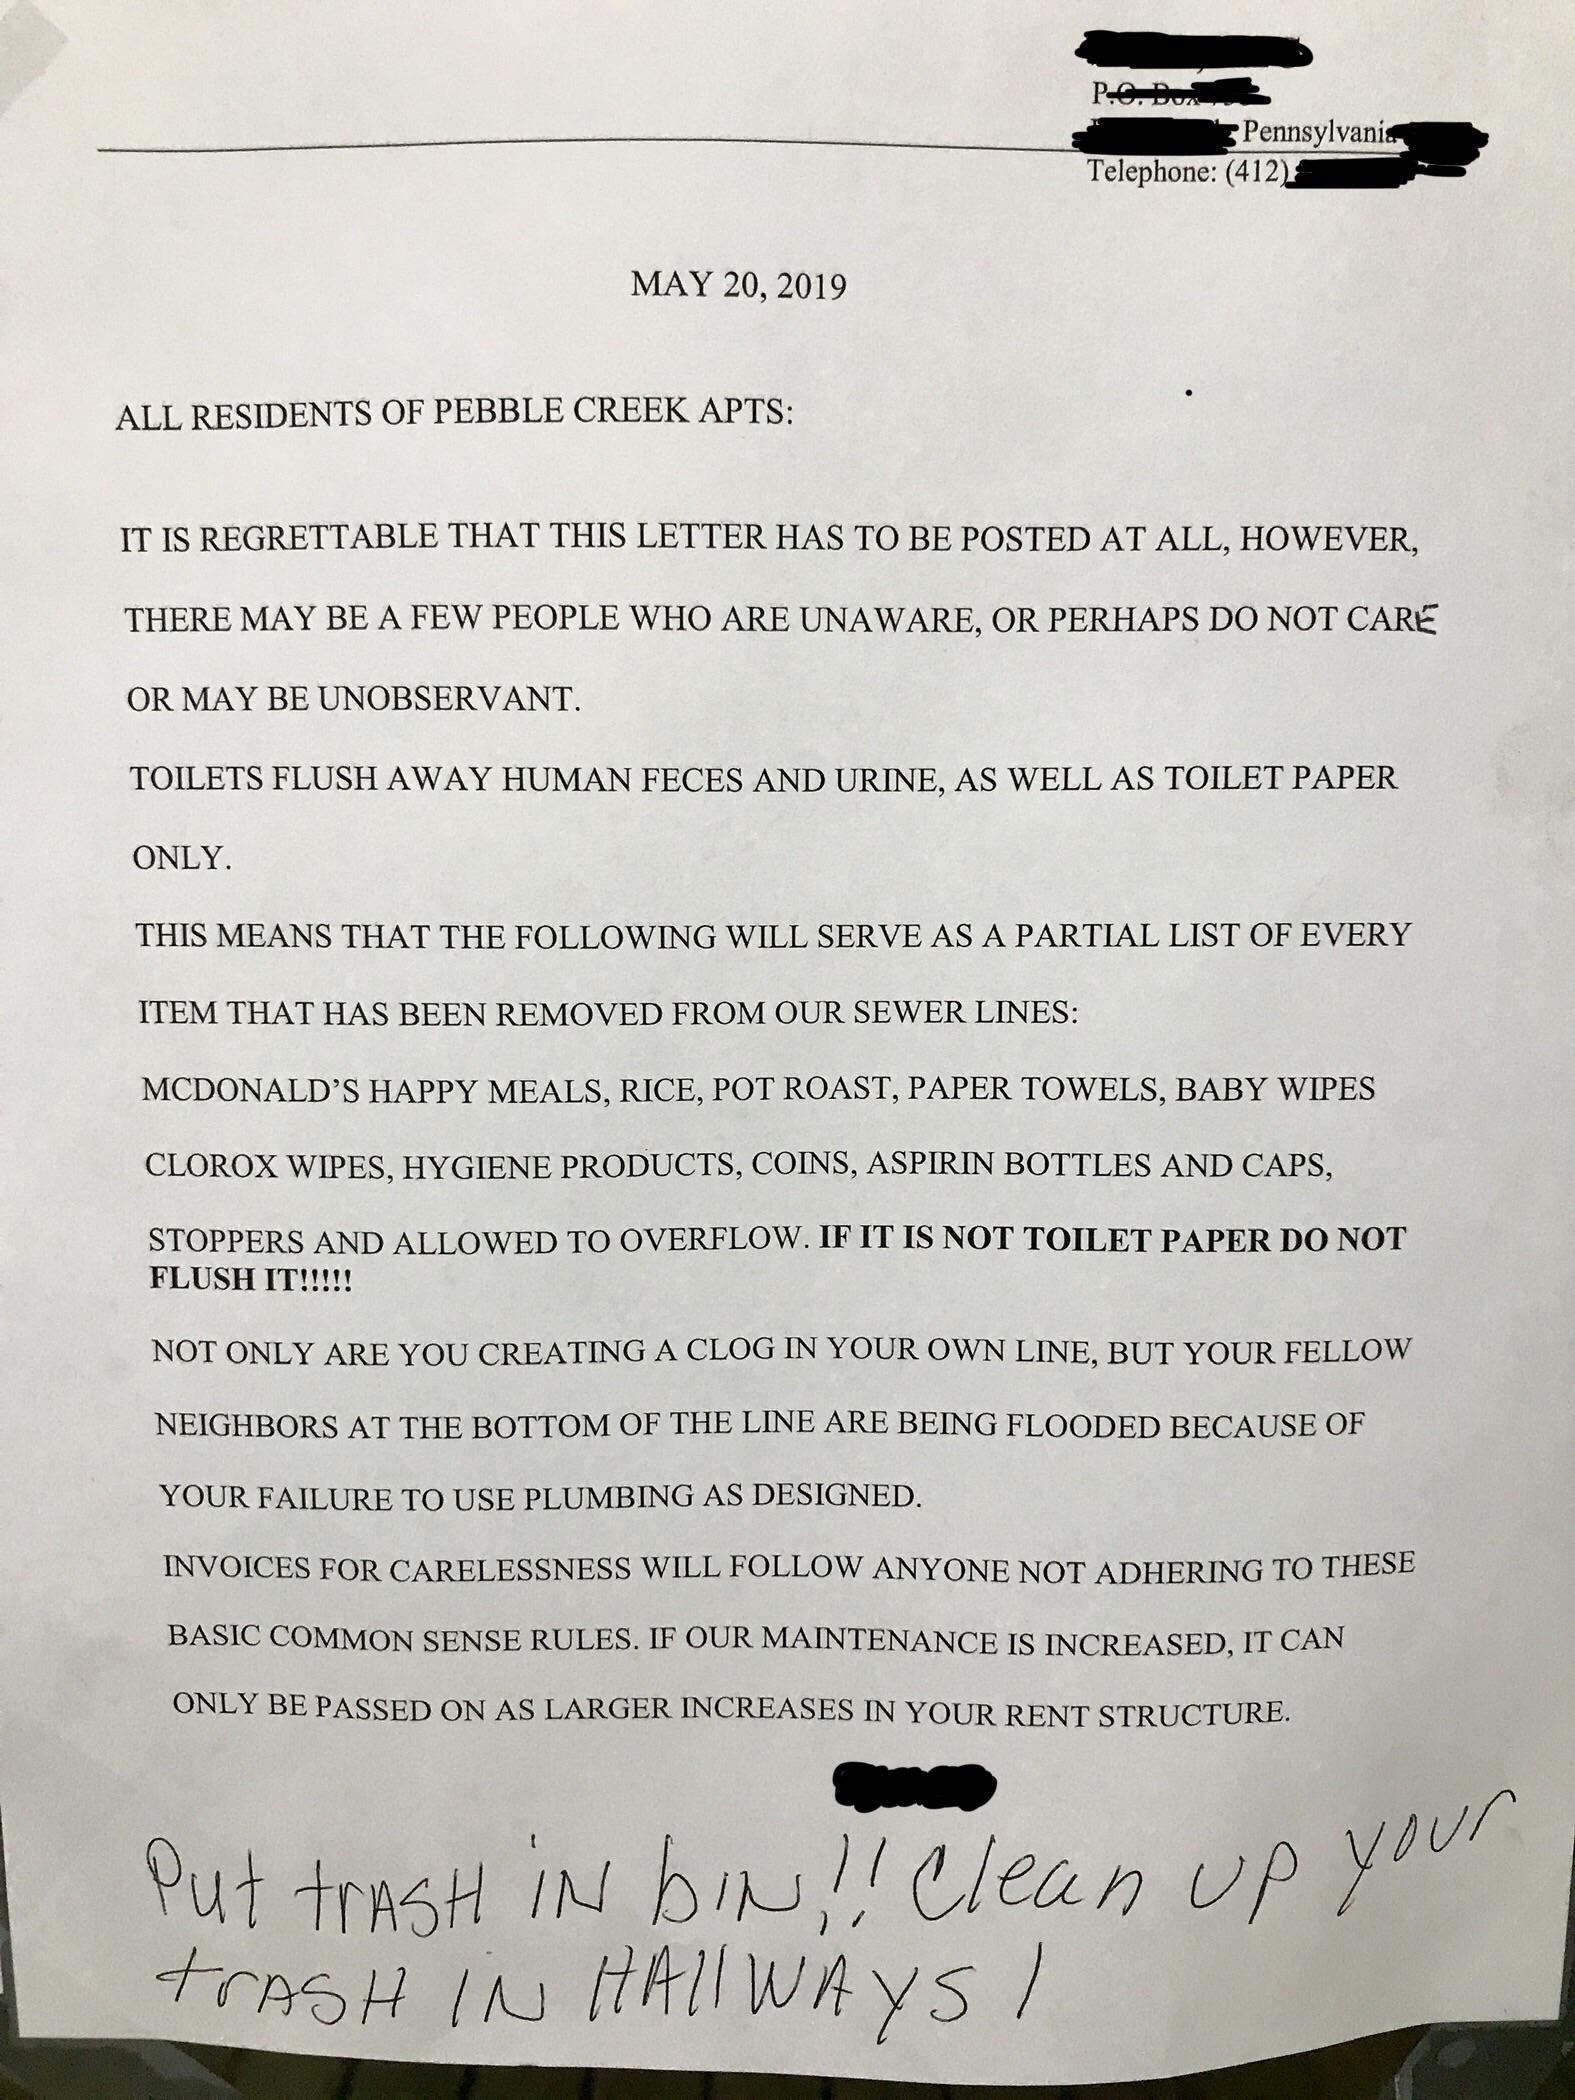 handwriting - PO.De Pennsylvania Telephone 412 All Residents Of Pebble Creek Apts It Is Regrettable That This Letter Has To Be Posted At All, However, There May Be A Few People Who Are Unaware, Or Perhaps Do Not Care Or May Be Unobservant. Toilets Flush A